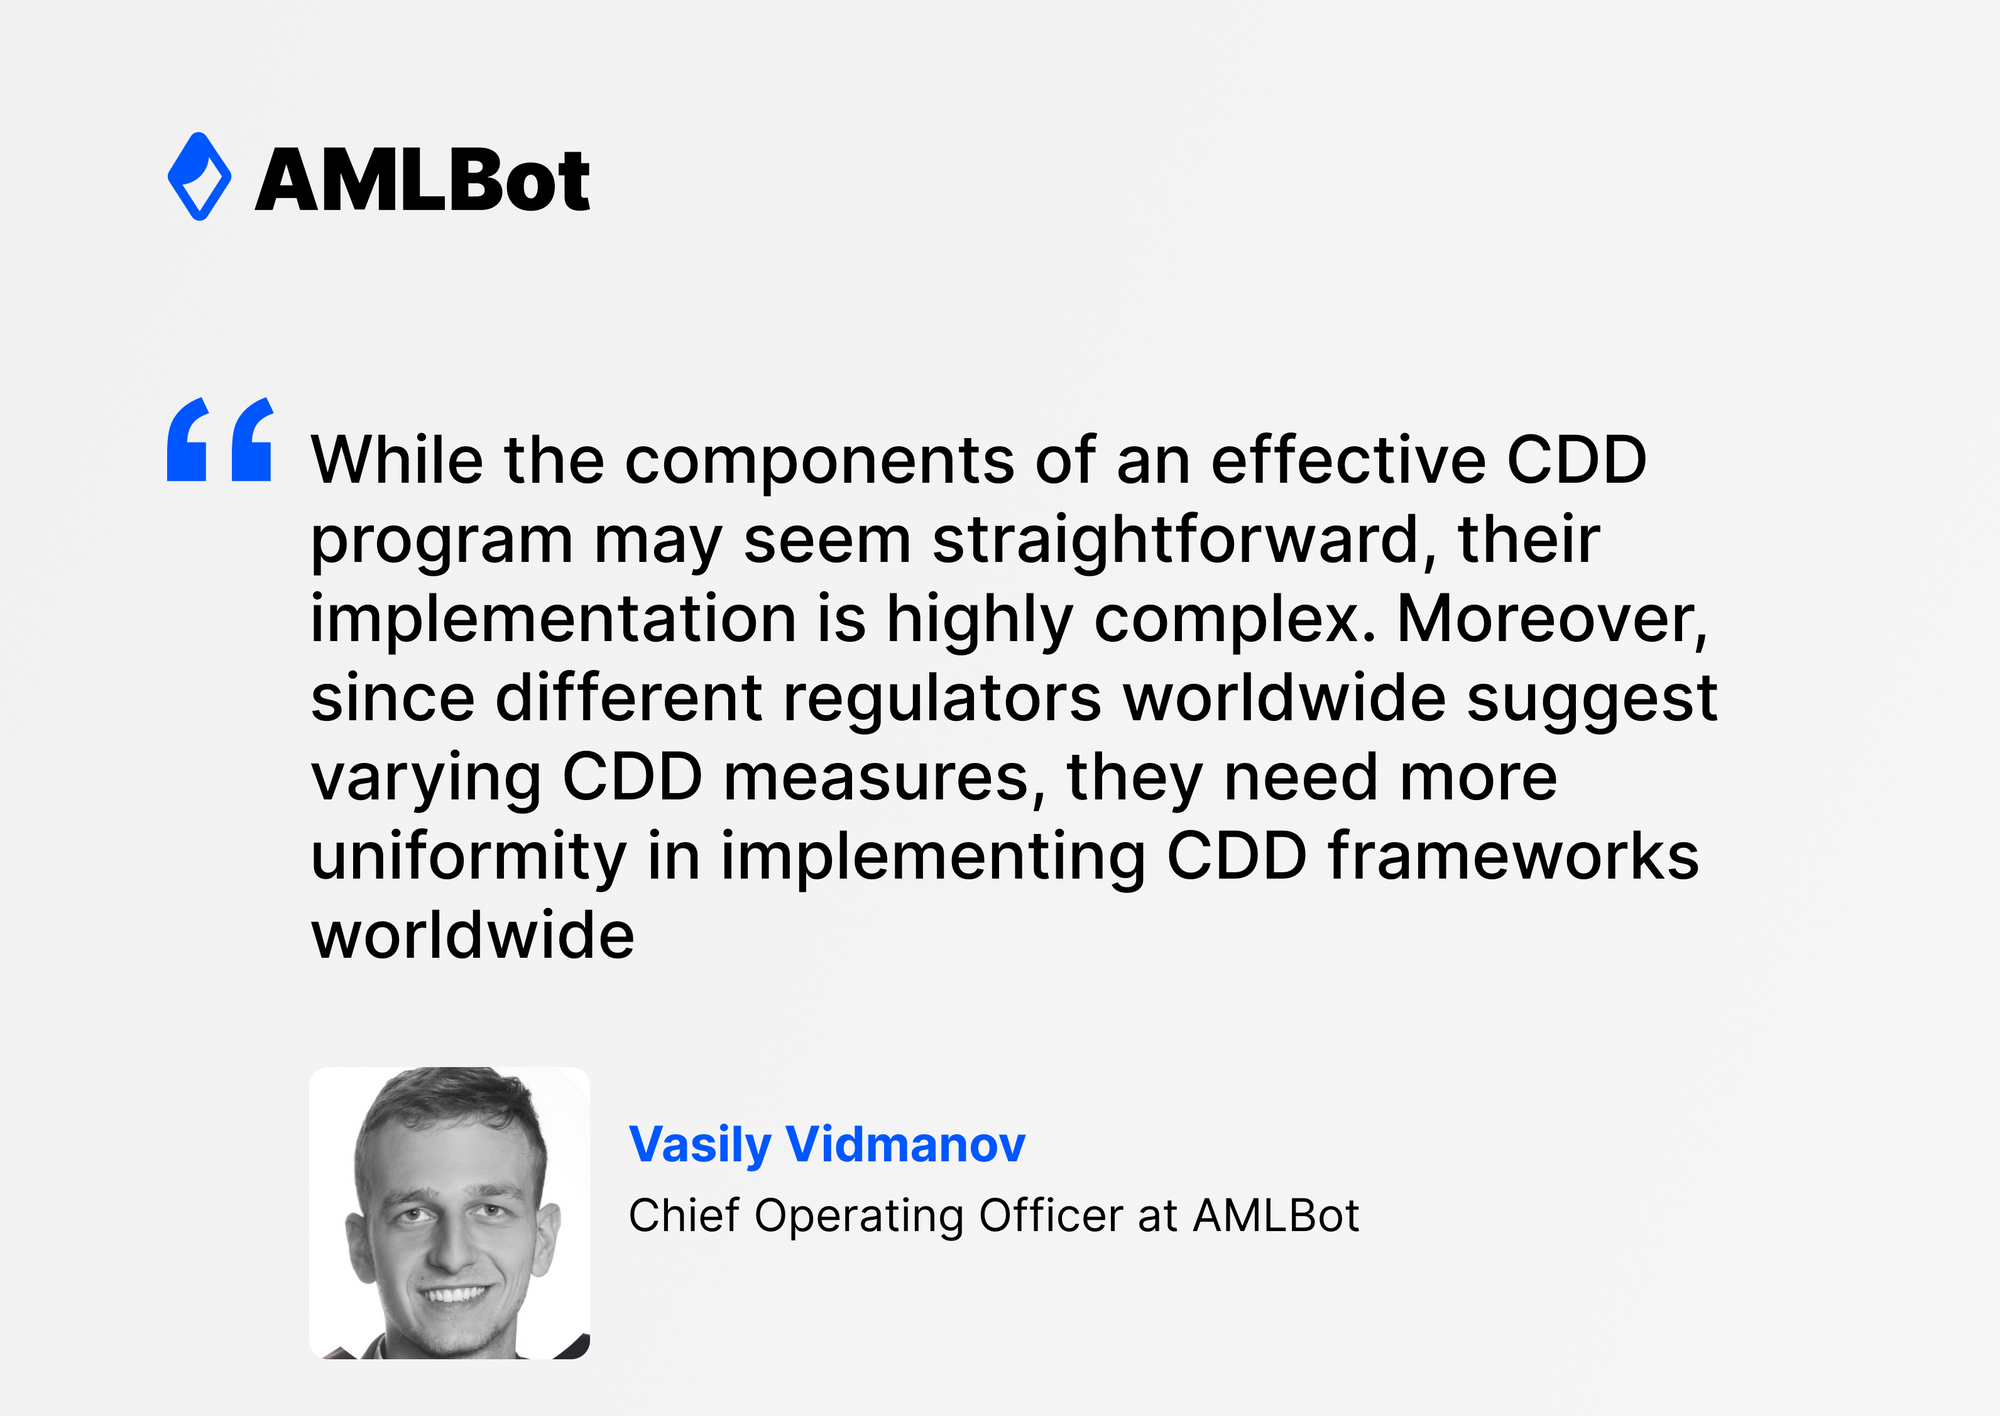 "While the components of an effective CDD program may seem straightforward, their implementation is highly complex."Vasily Vidmanov Chief Operating Officer at AMLBot